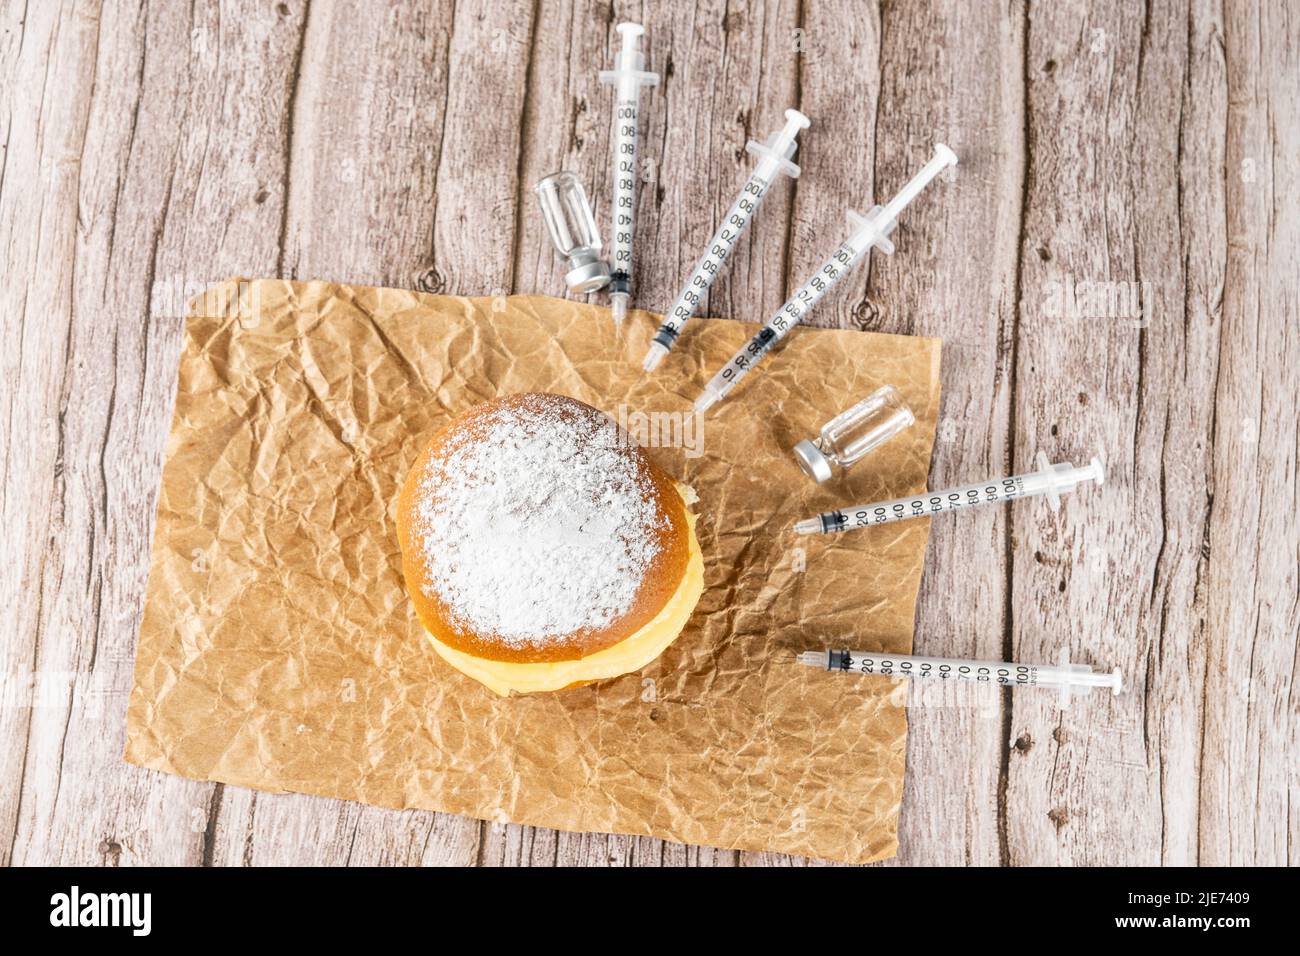 Brazilian cream doughnuts surrounded by various syringes and ampoules with insulin top view. Stock Photo